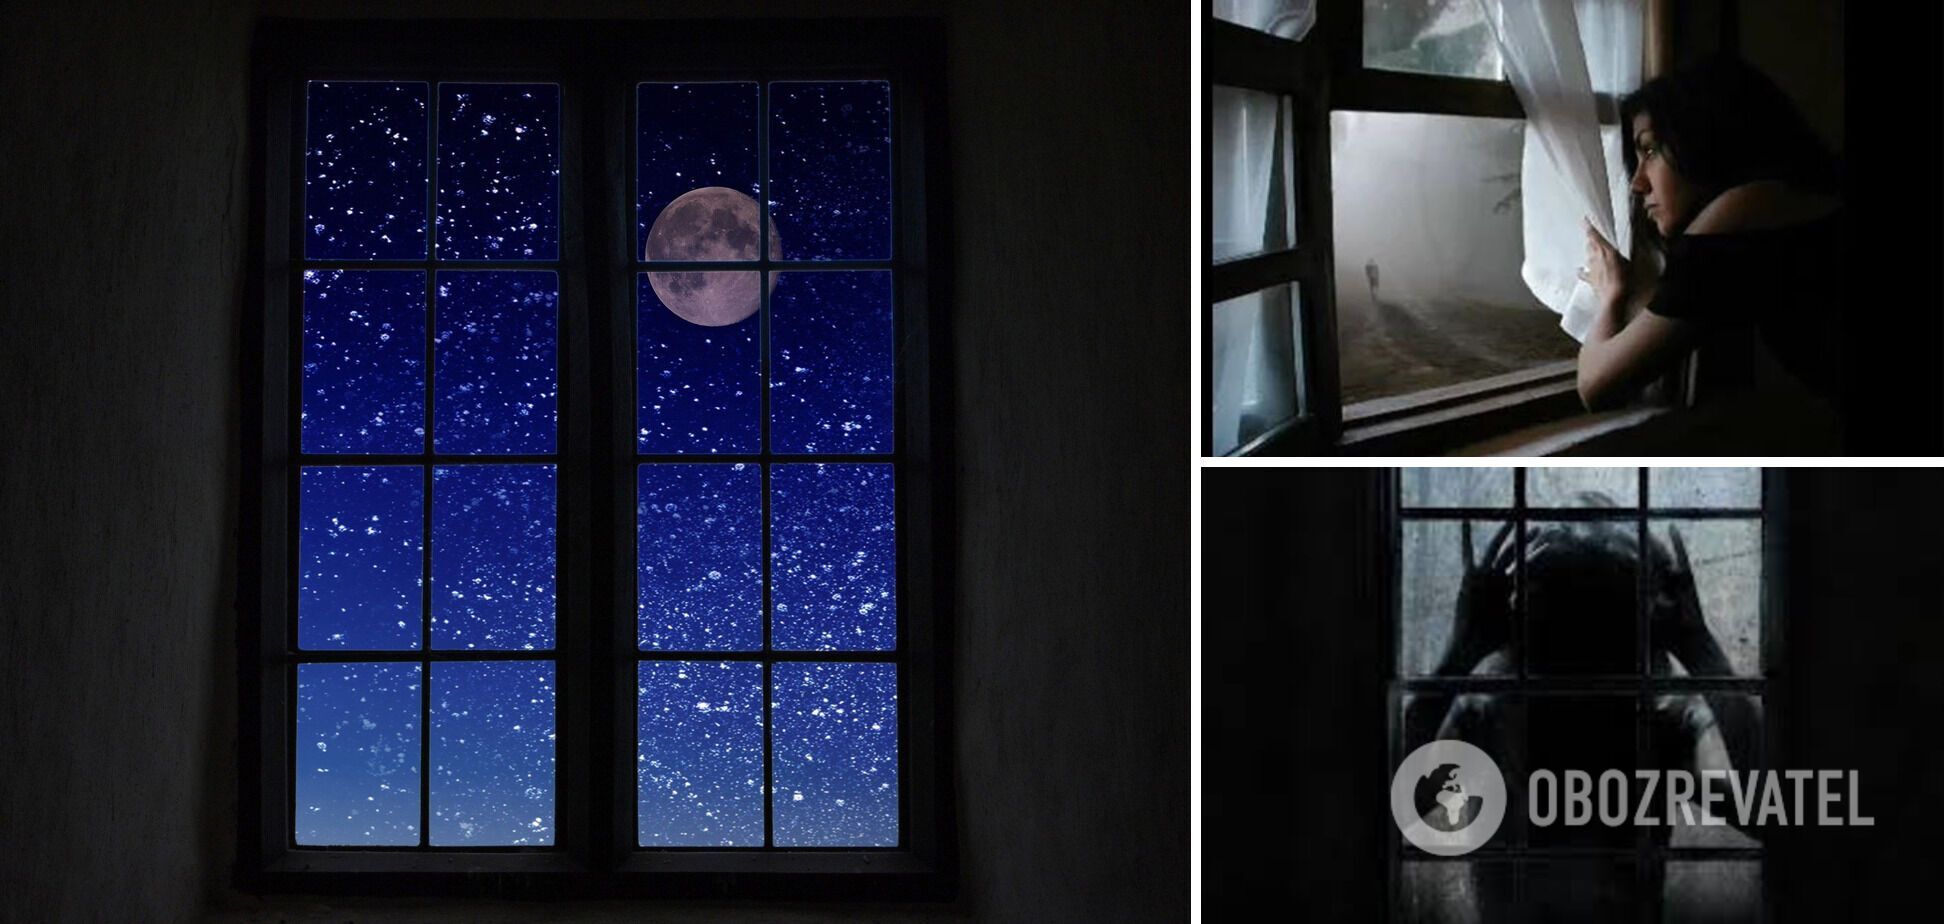 Why you shouldn't look out the window at night: how ancestors explained superstitions